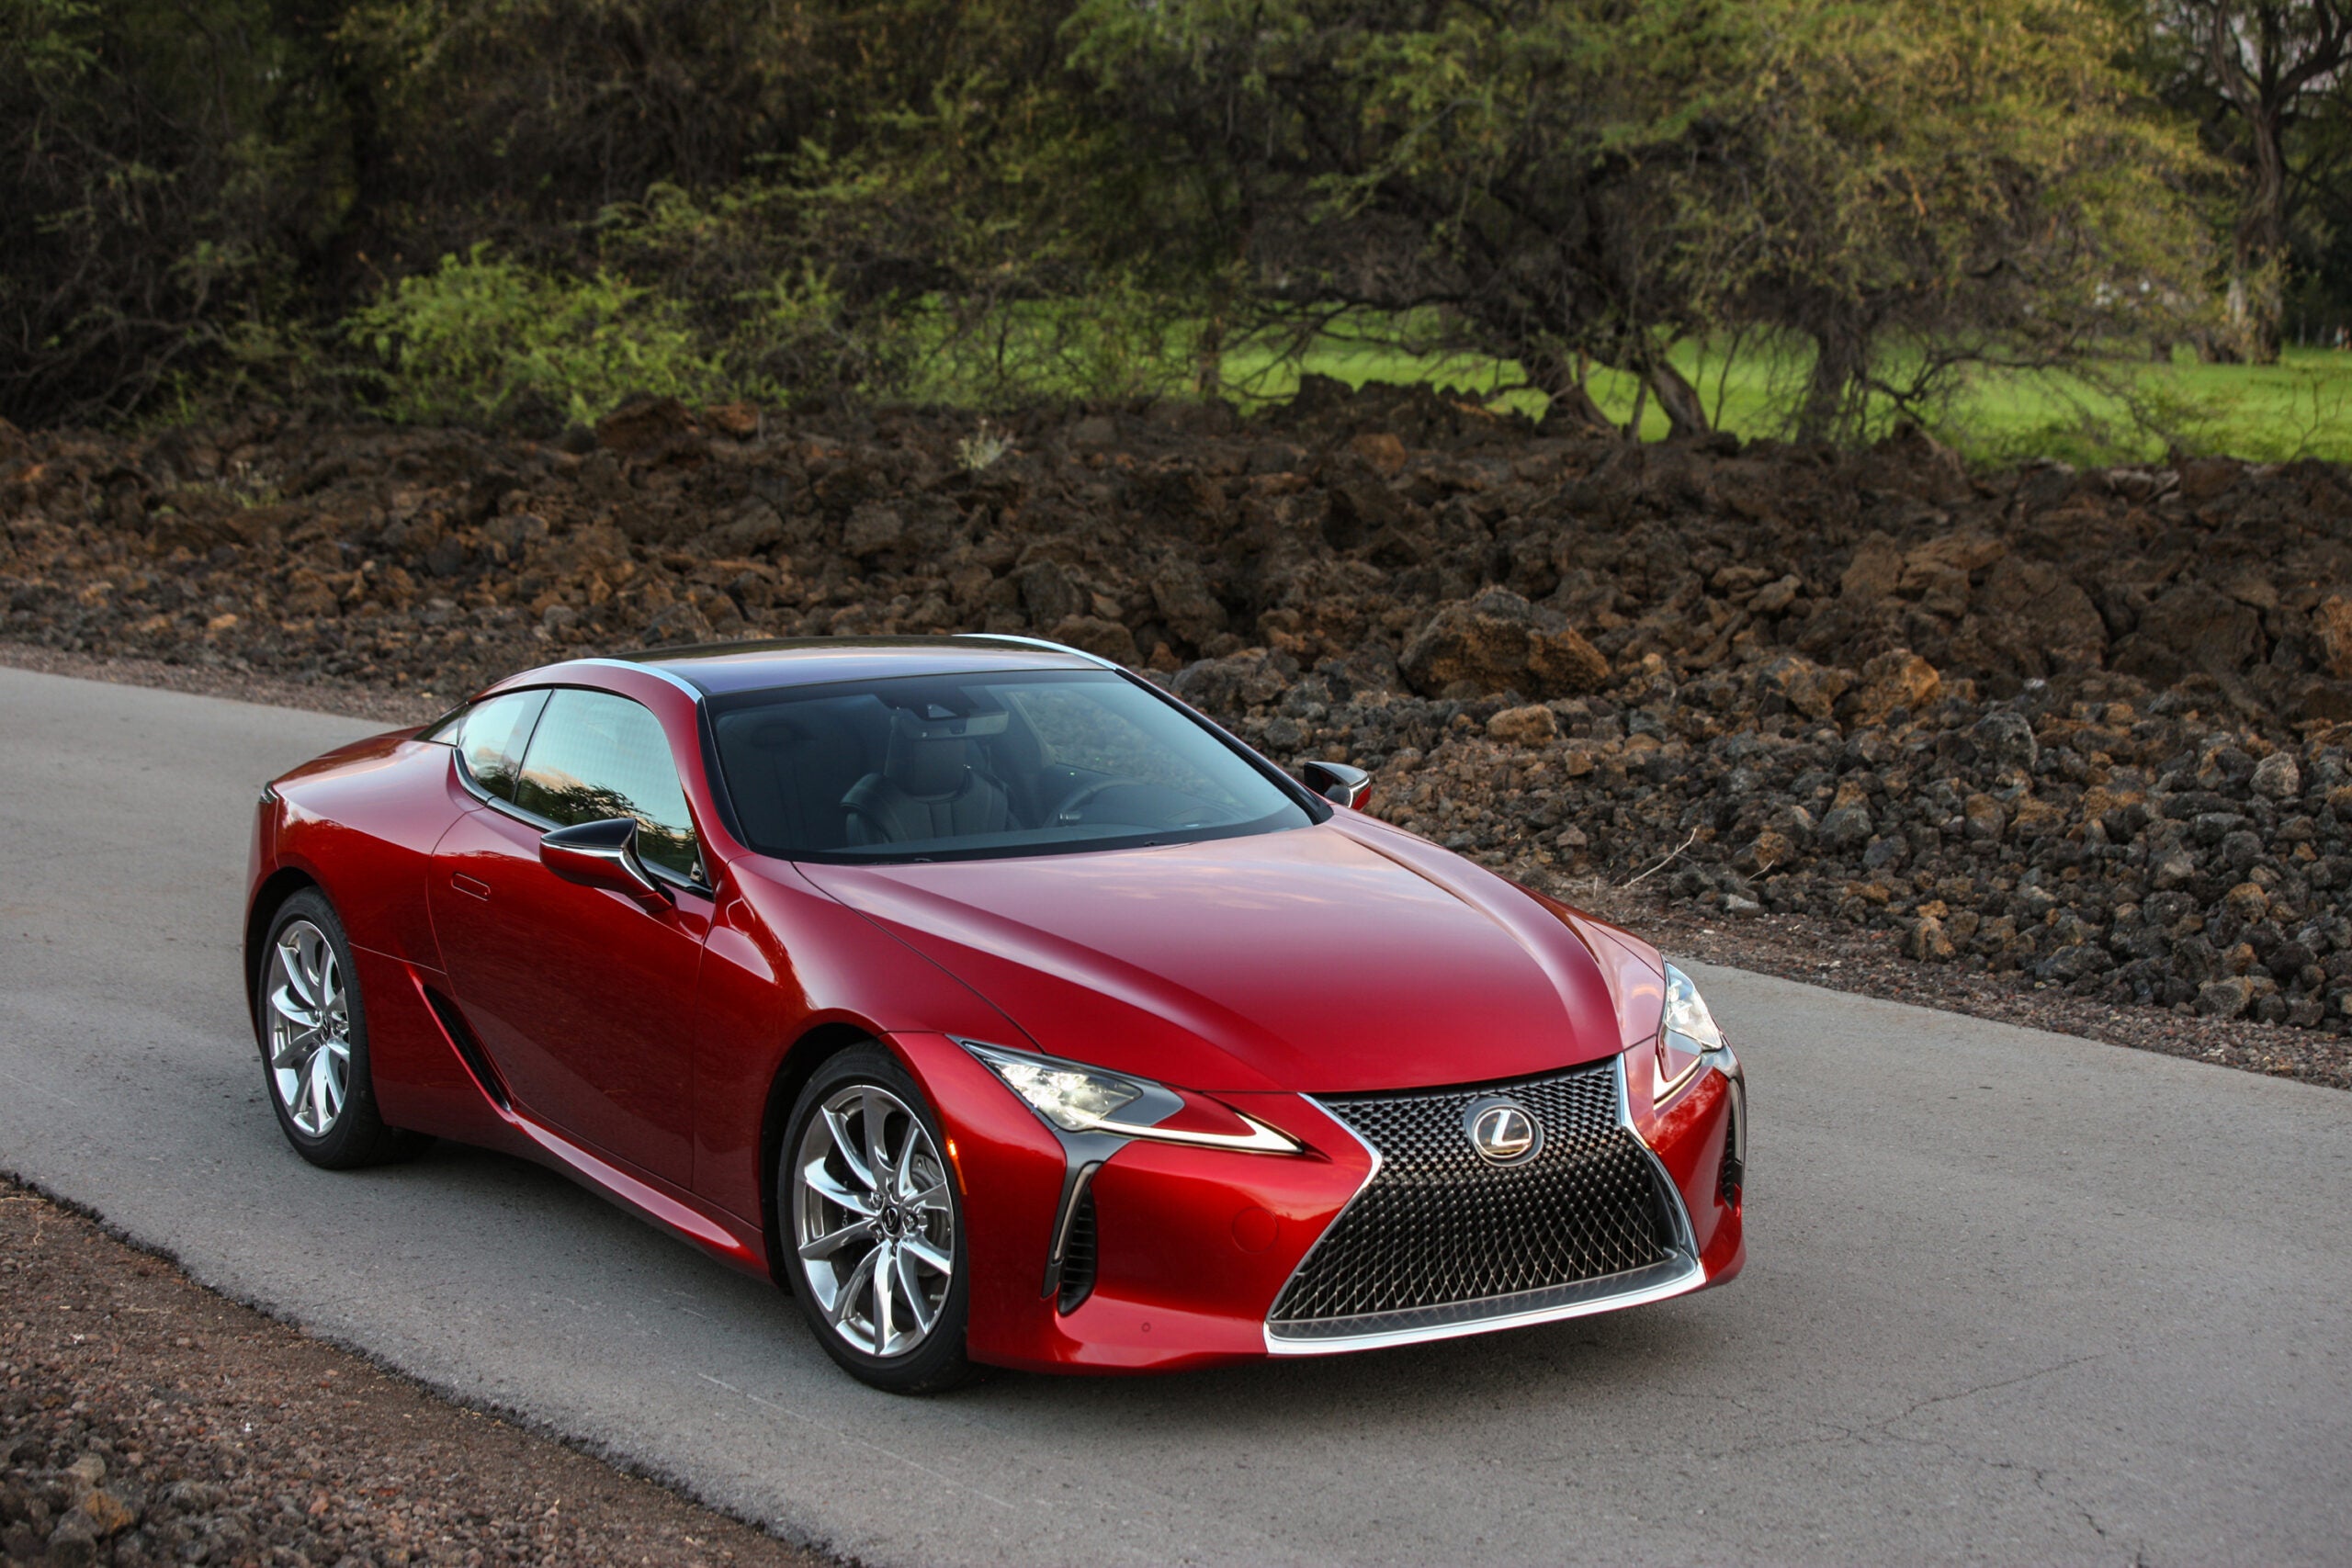 What the experts say about the 2018 Lexus LC500